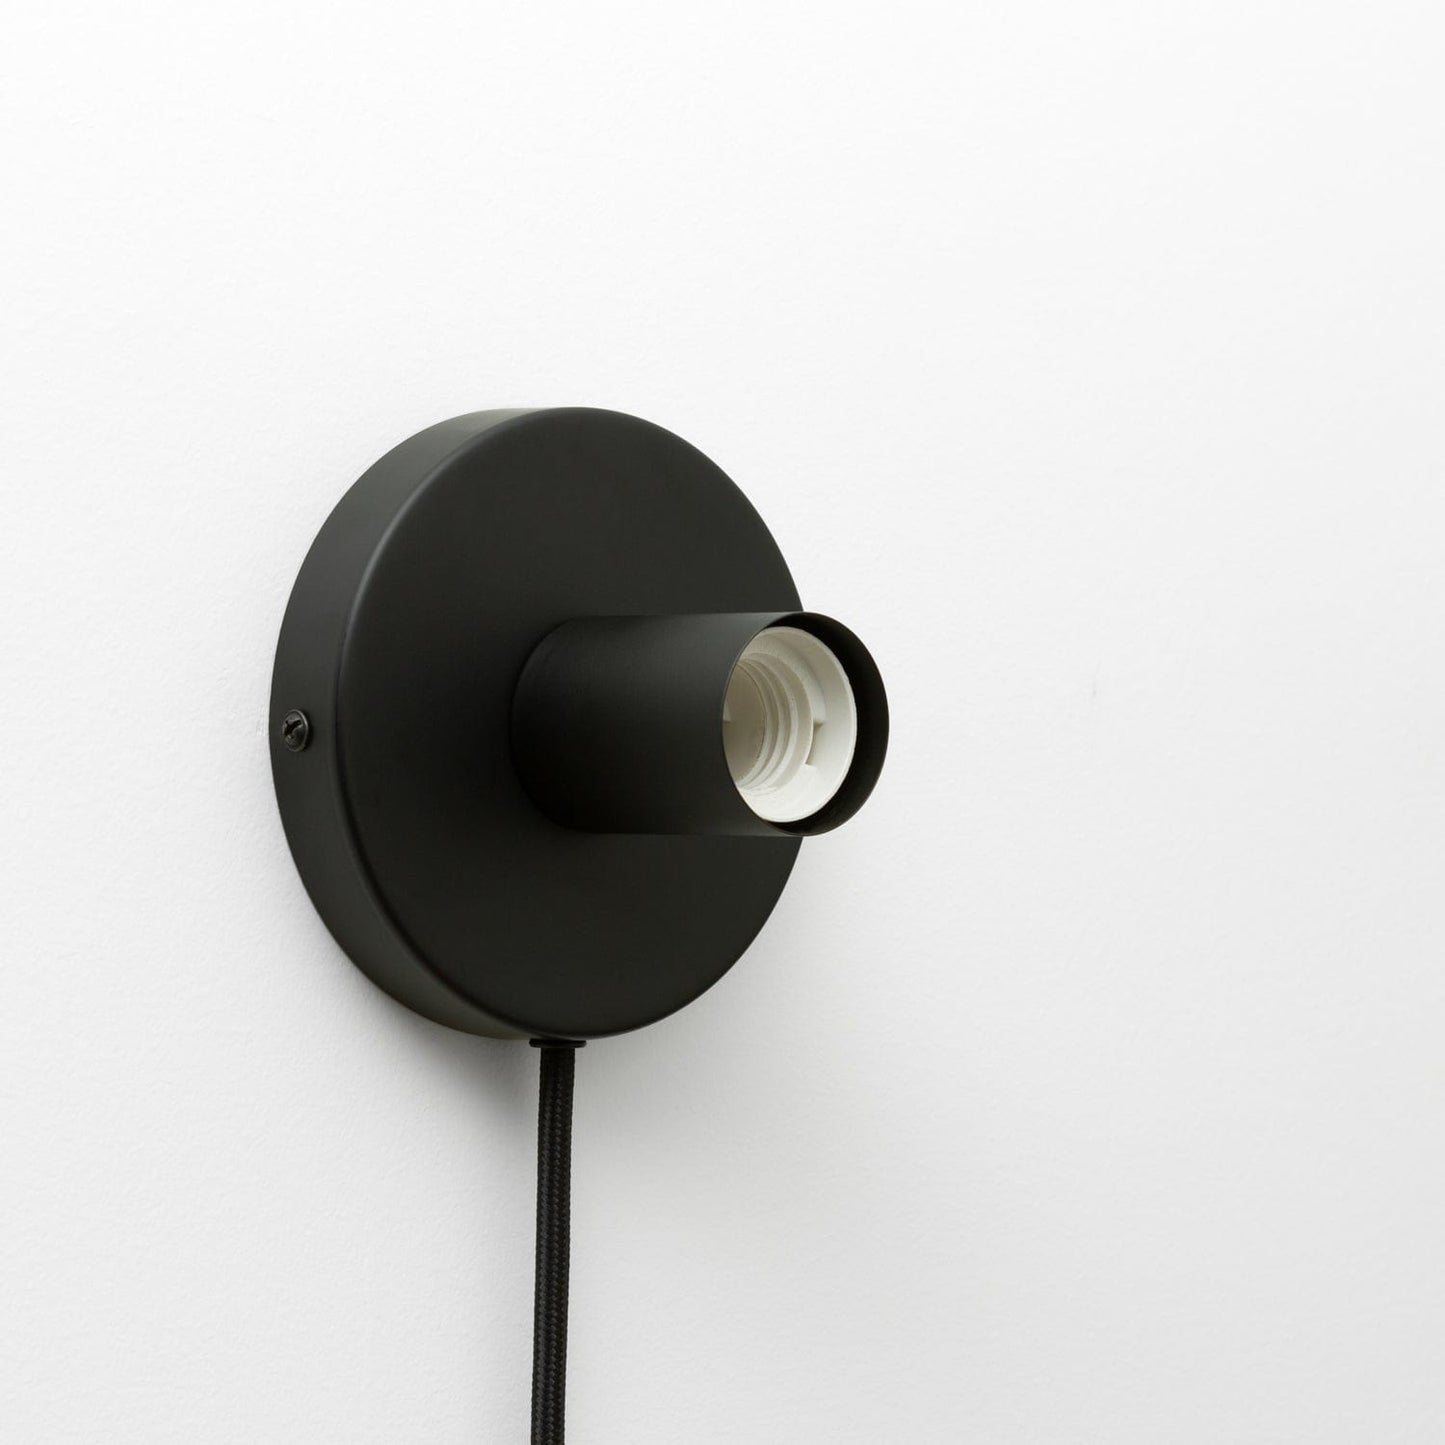 Button Plug-In Sconce in Matte Black finish